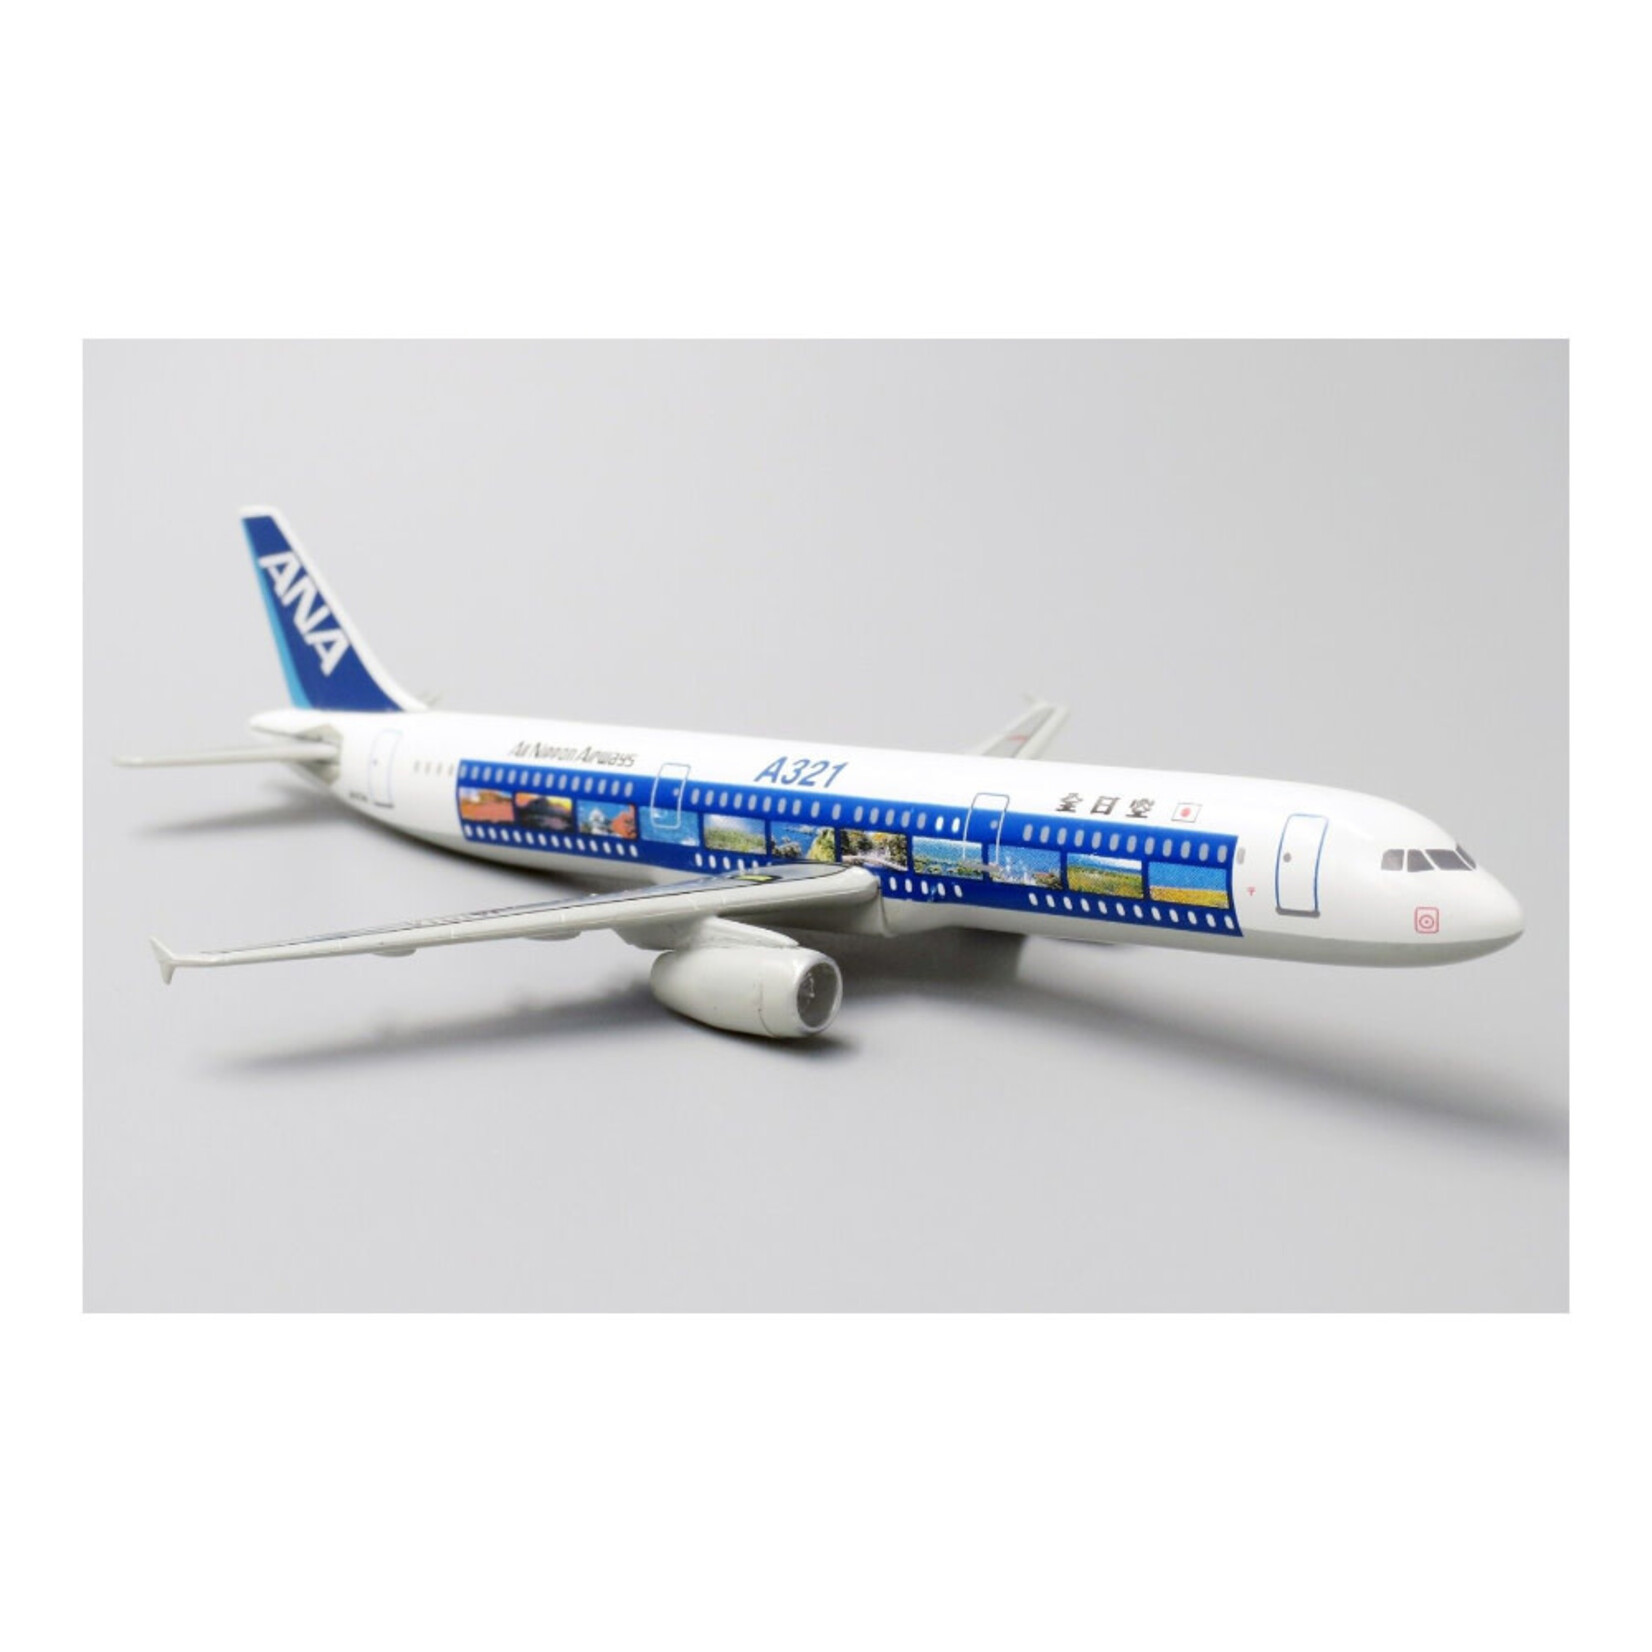 DRAGON WING DRAGON WINGS 1/400 JET AIR ANA ‘SCENIC FILM’ A321